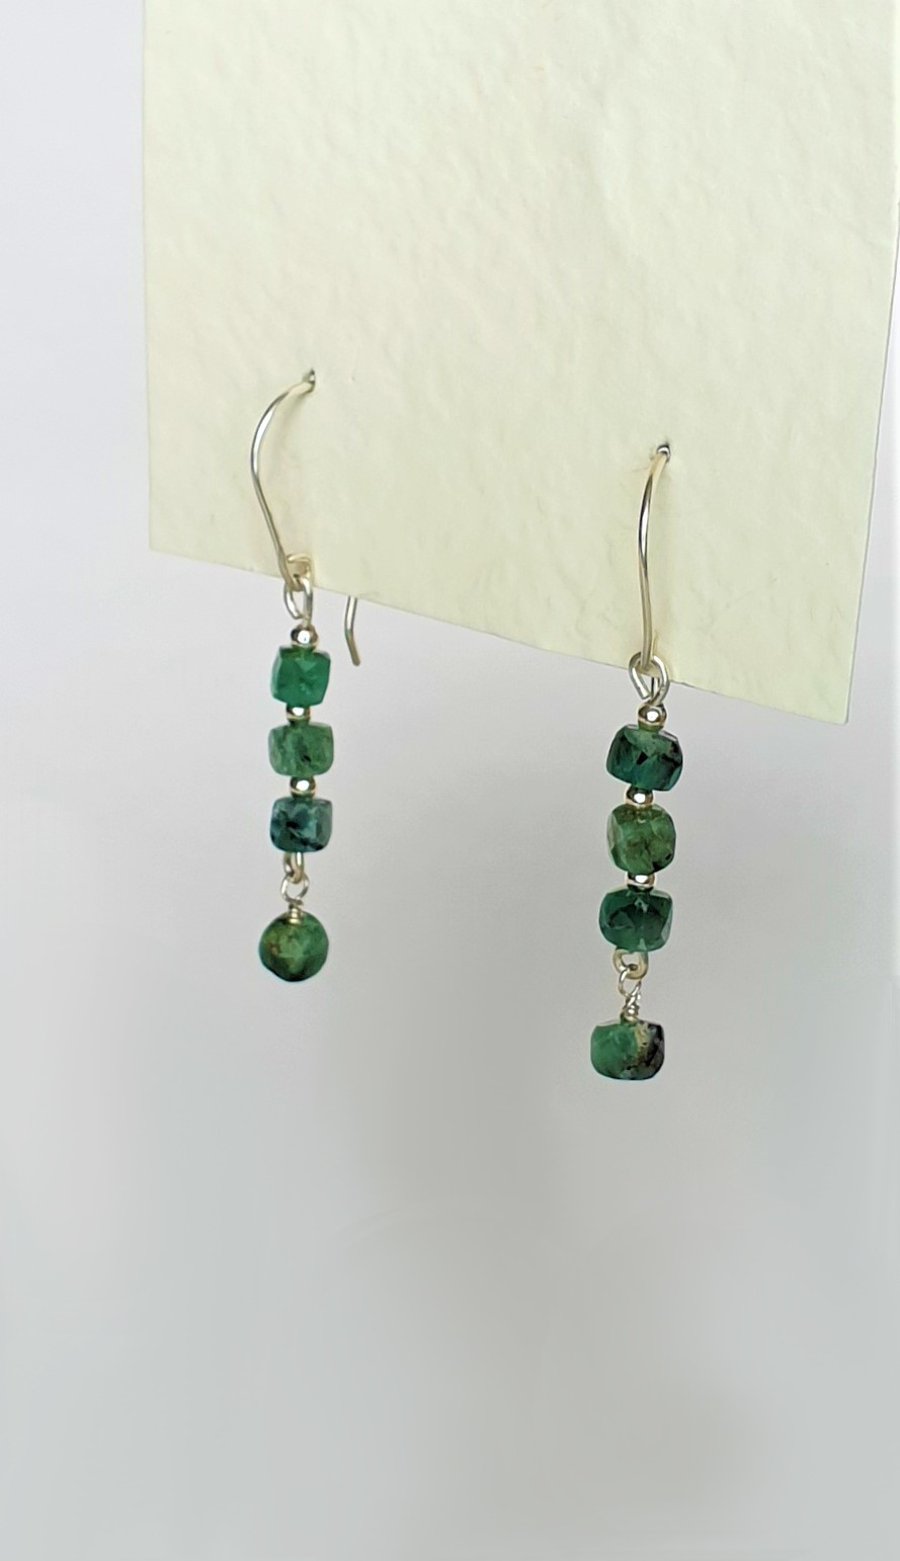 Elegant And Dainty Genuine Emerald And Sterling Silver Earrings